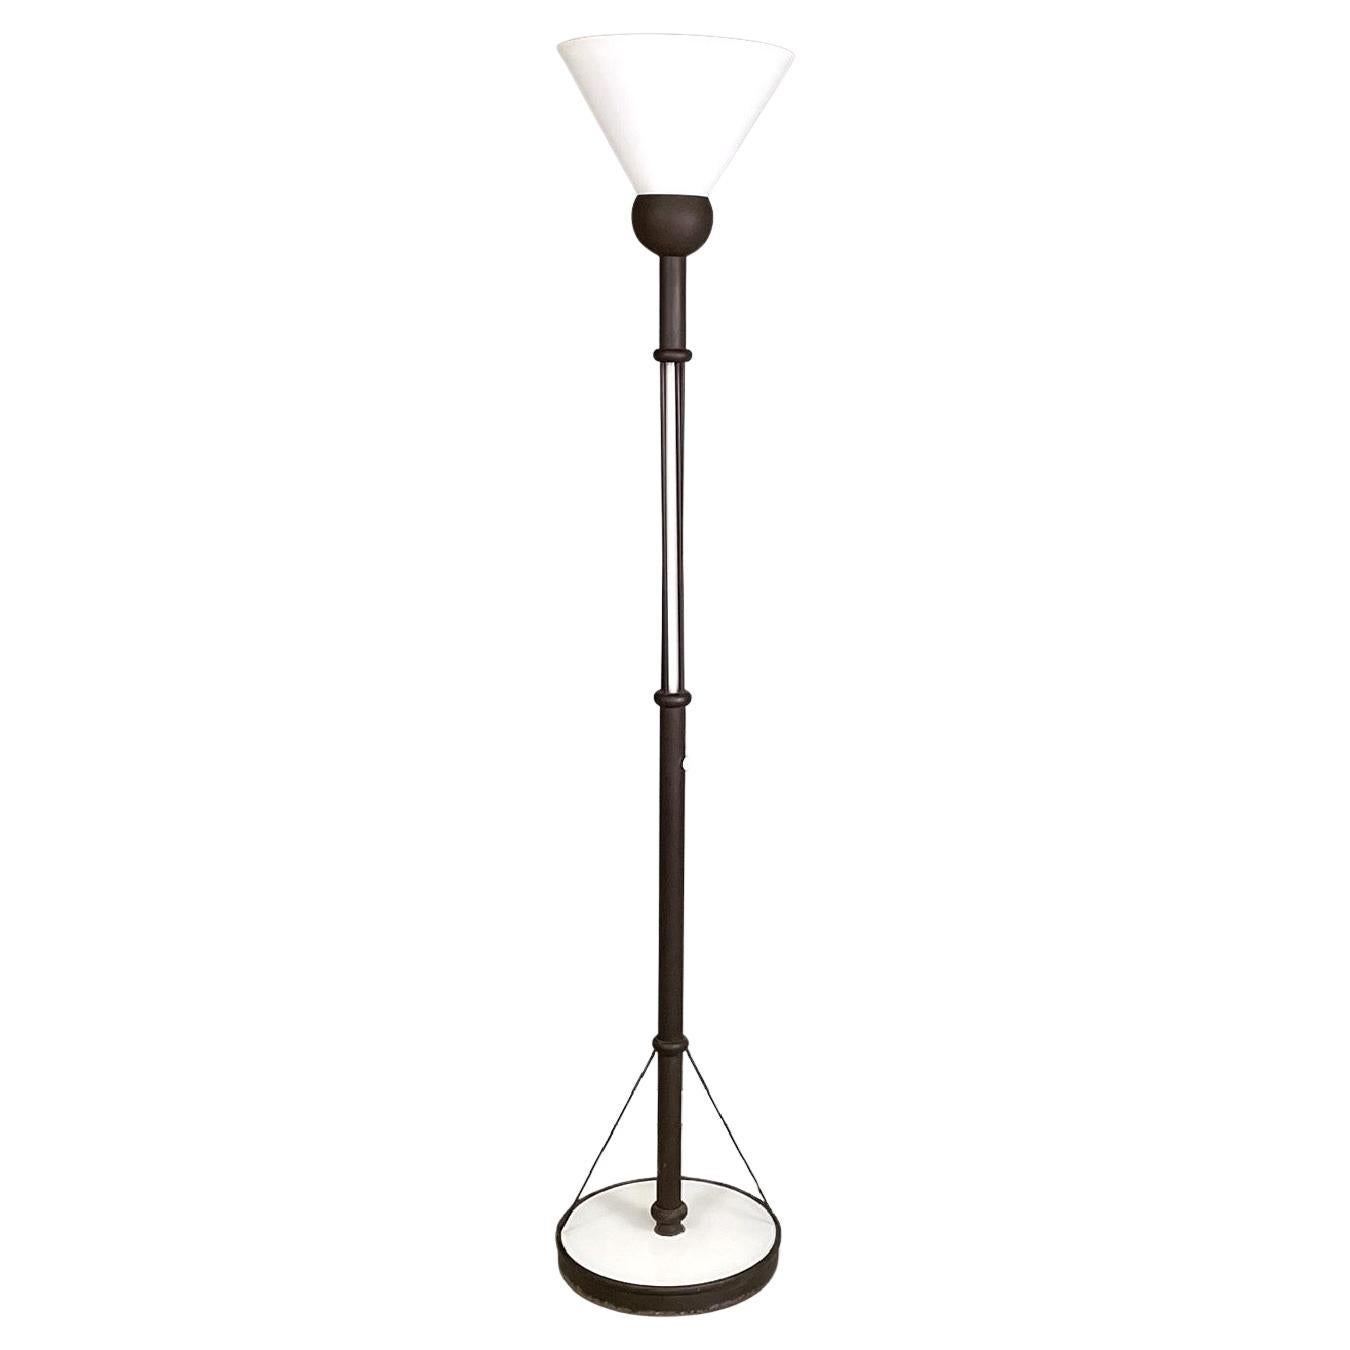 Italian modern white glass and metal floor lamp by Roberto Freno for VeArt 1980s For Sale